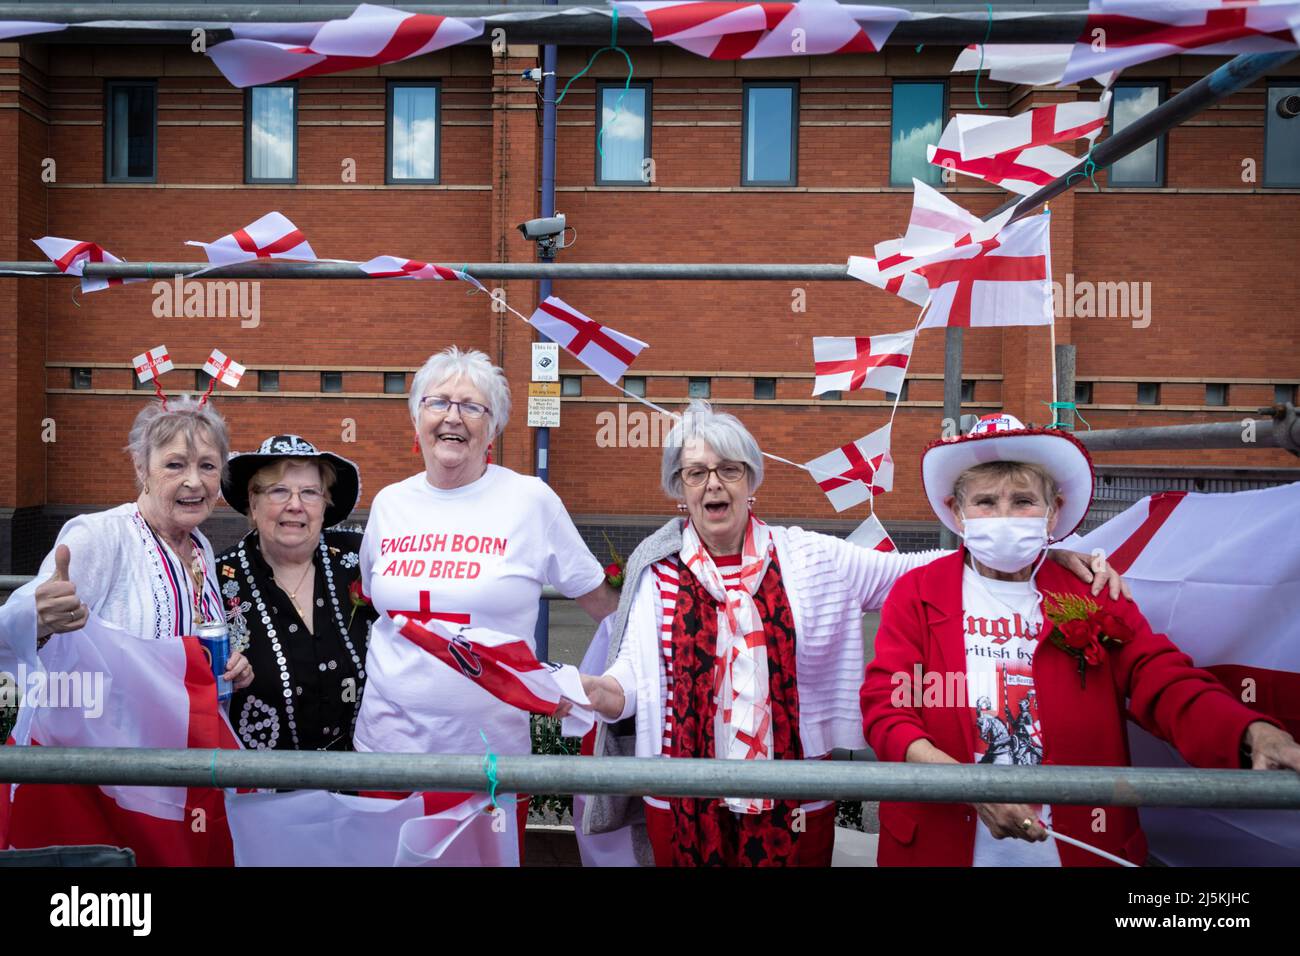 Manchester, UK. 24th Apr, 2022. People dressed up in red and white outfits join the annual St Georges Day celebration which marks the death of the patron Saint Of England.ÊAndy Barton/Alamy Live News Credit: Andy Barton/Alamy Live News Stock Photo